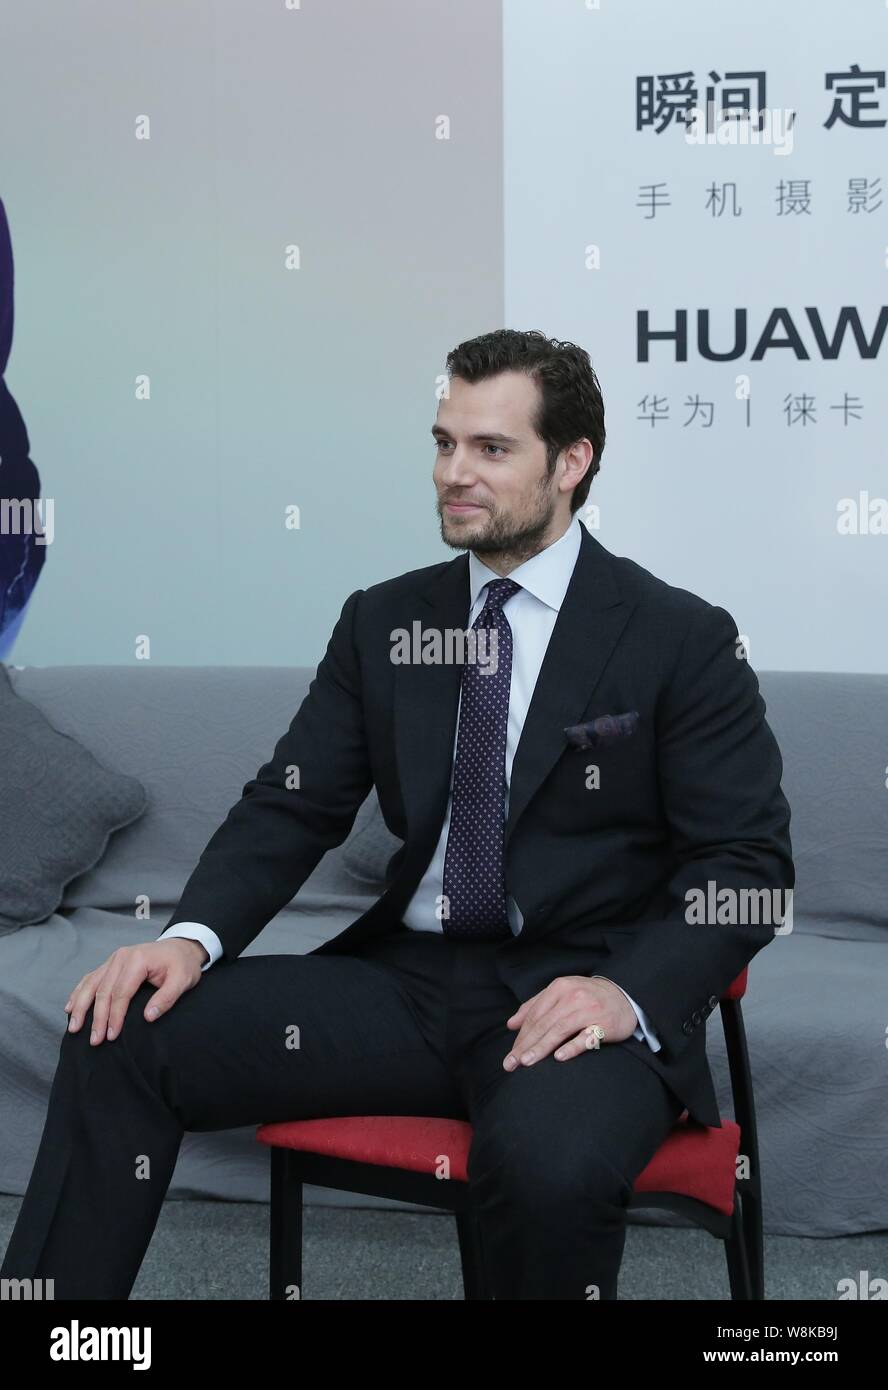 British actor Henry Cavill attends a launch event for the Huawei P9 smartphone in Shanghai, China, 15 April 2016. Stock Photo